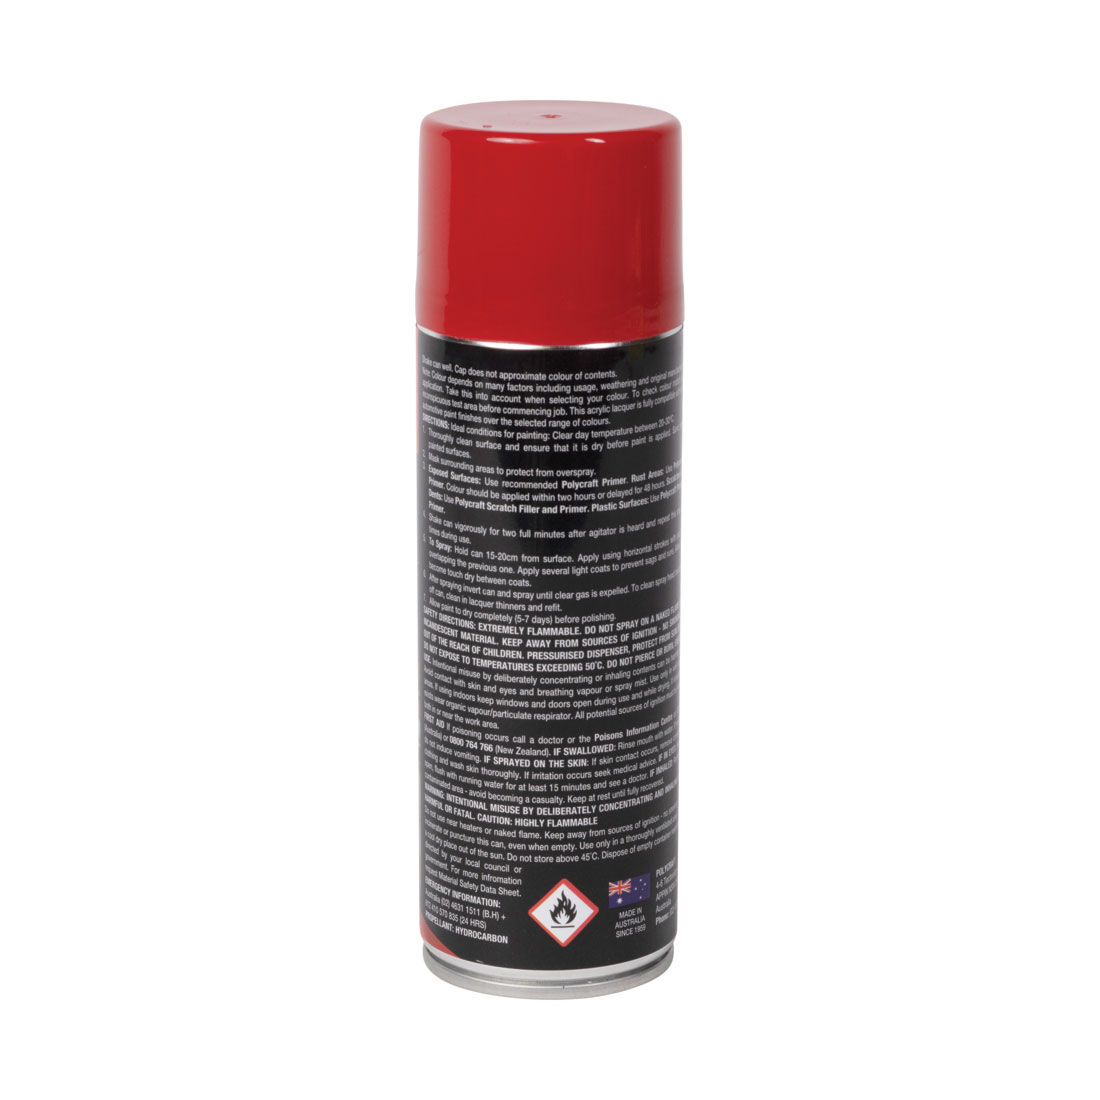 Polycraft Touch Up Paint Red Hot/Sting Red - DSH87 150g, , scaau_hi-res